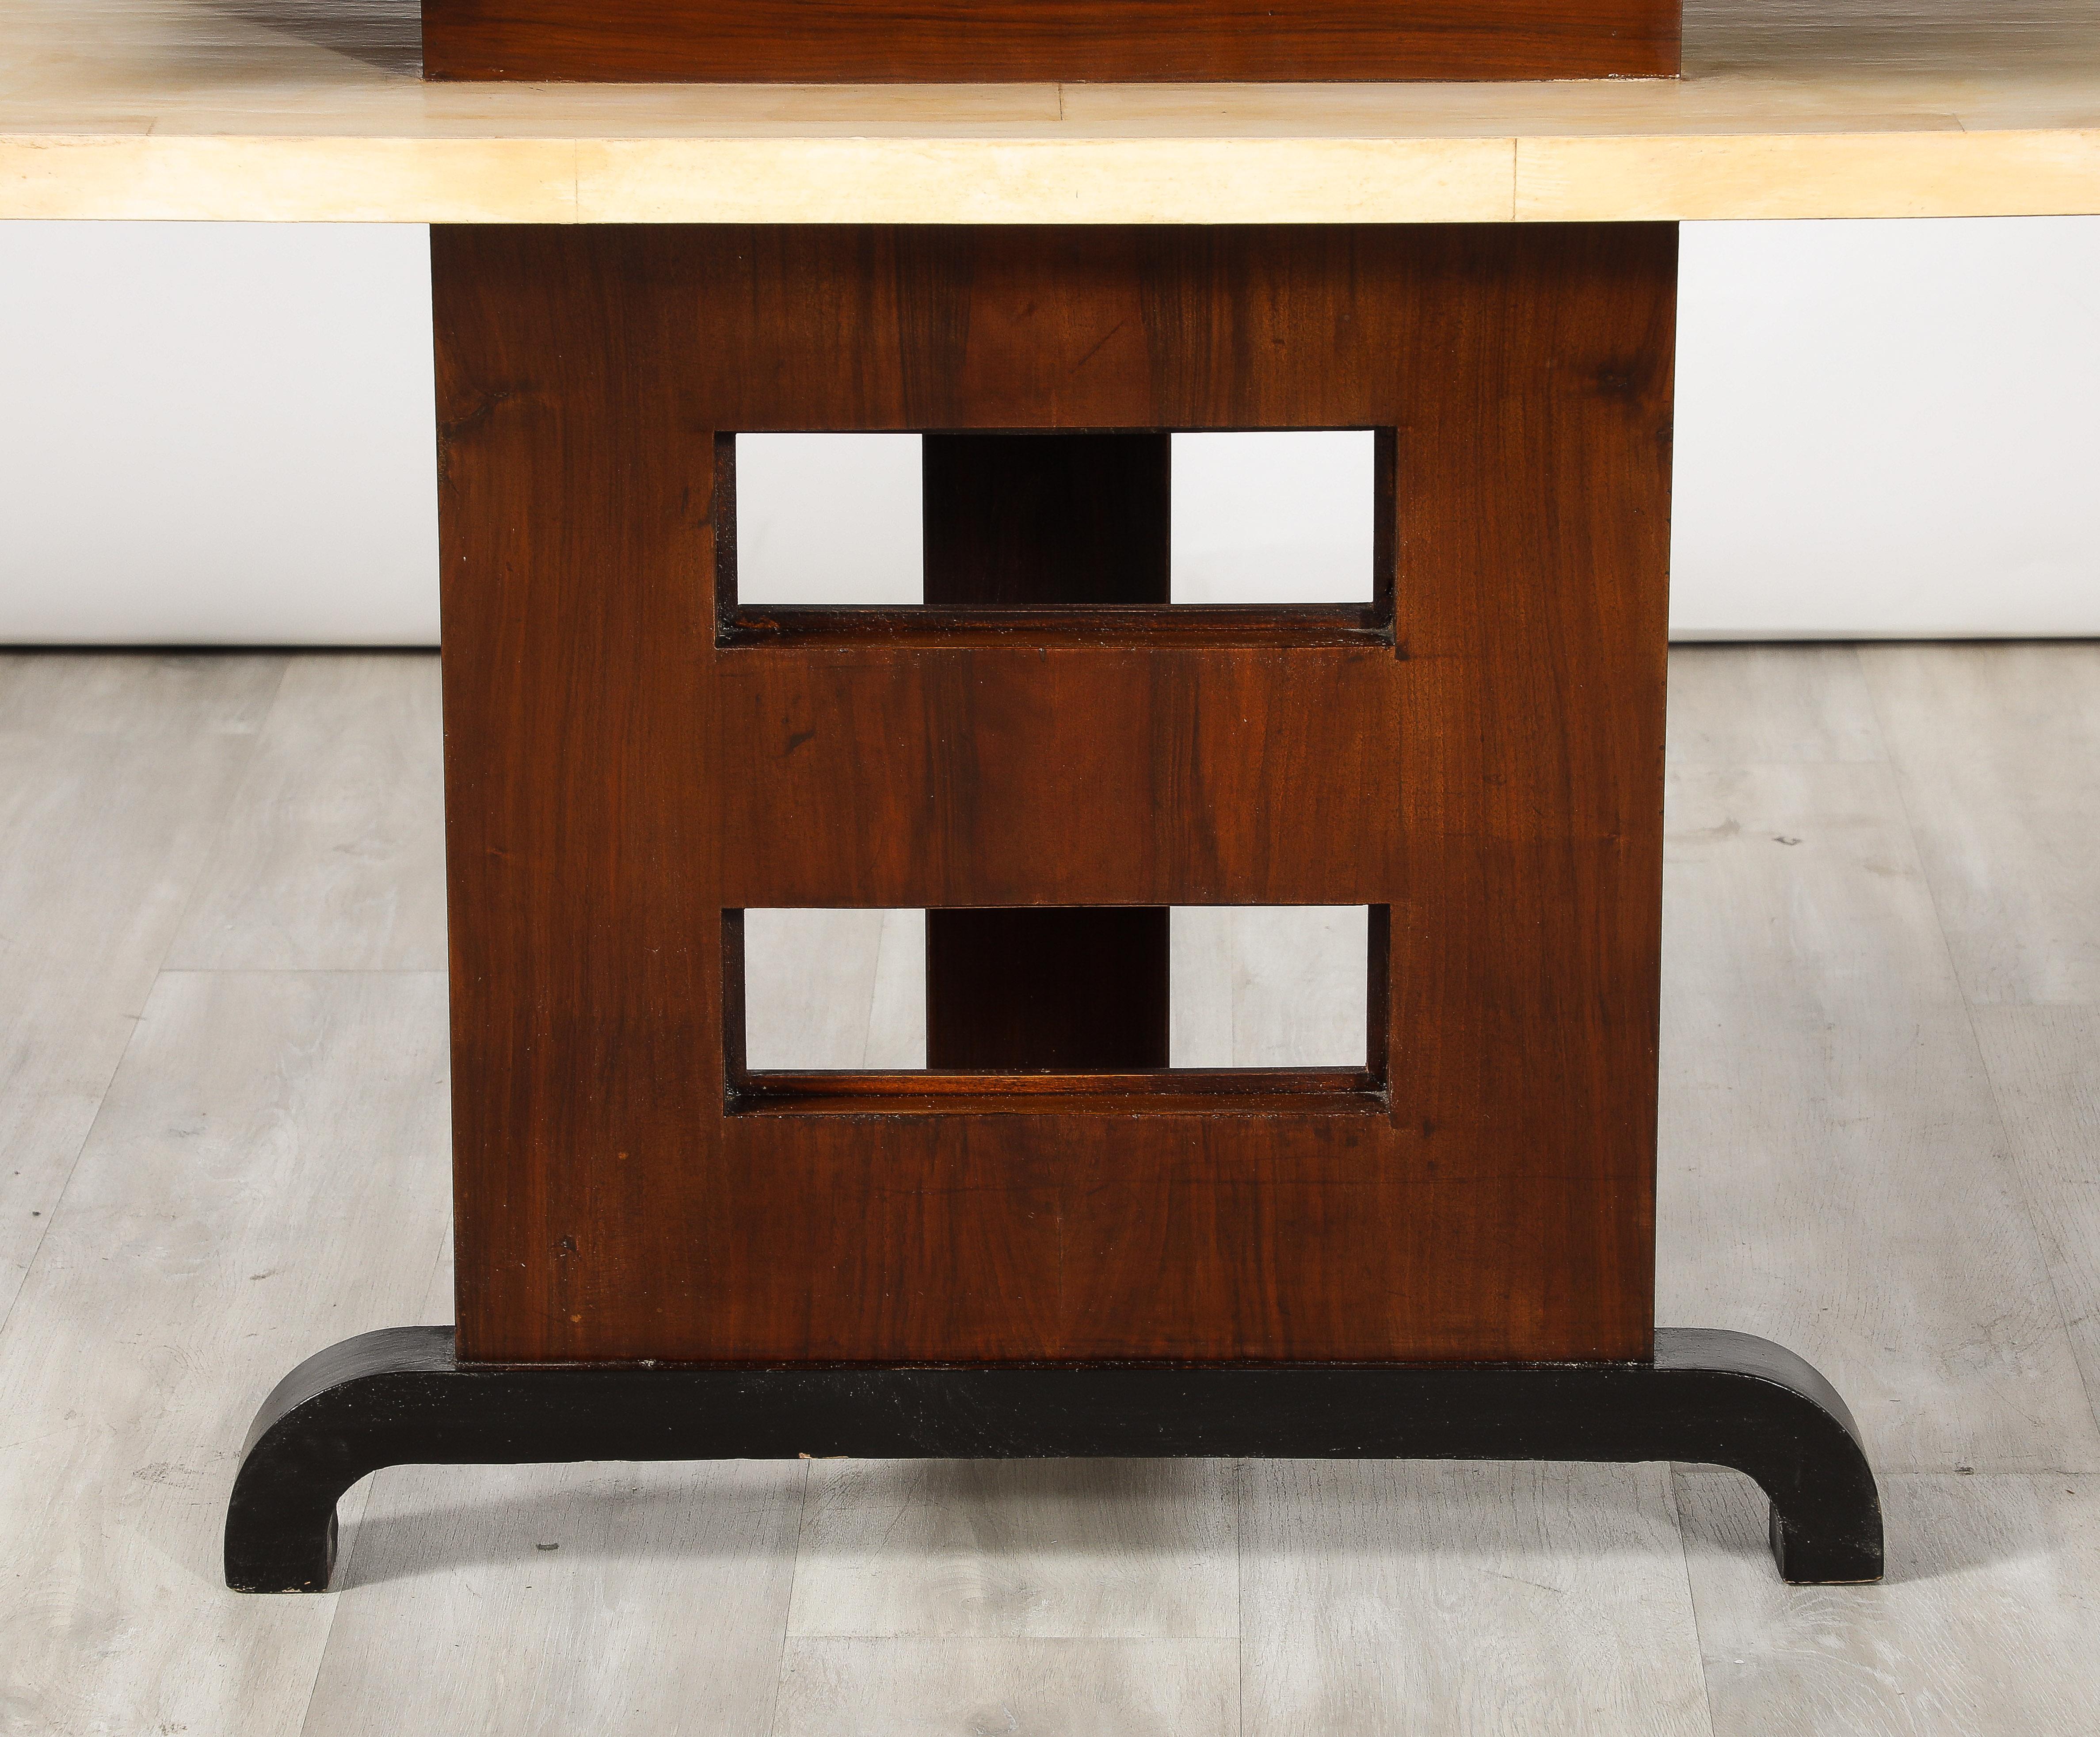 An Italian Art Deco console table with two upper shelves in vellum supported by a rectangular base in palisander wood with square cut-outs.  The central back column and angled base are ebonized.  The use of vellum, palisander and ebonized wood